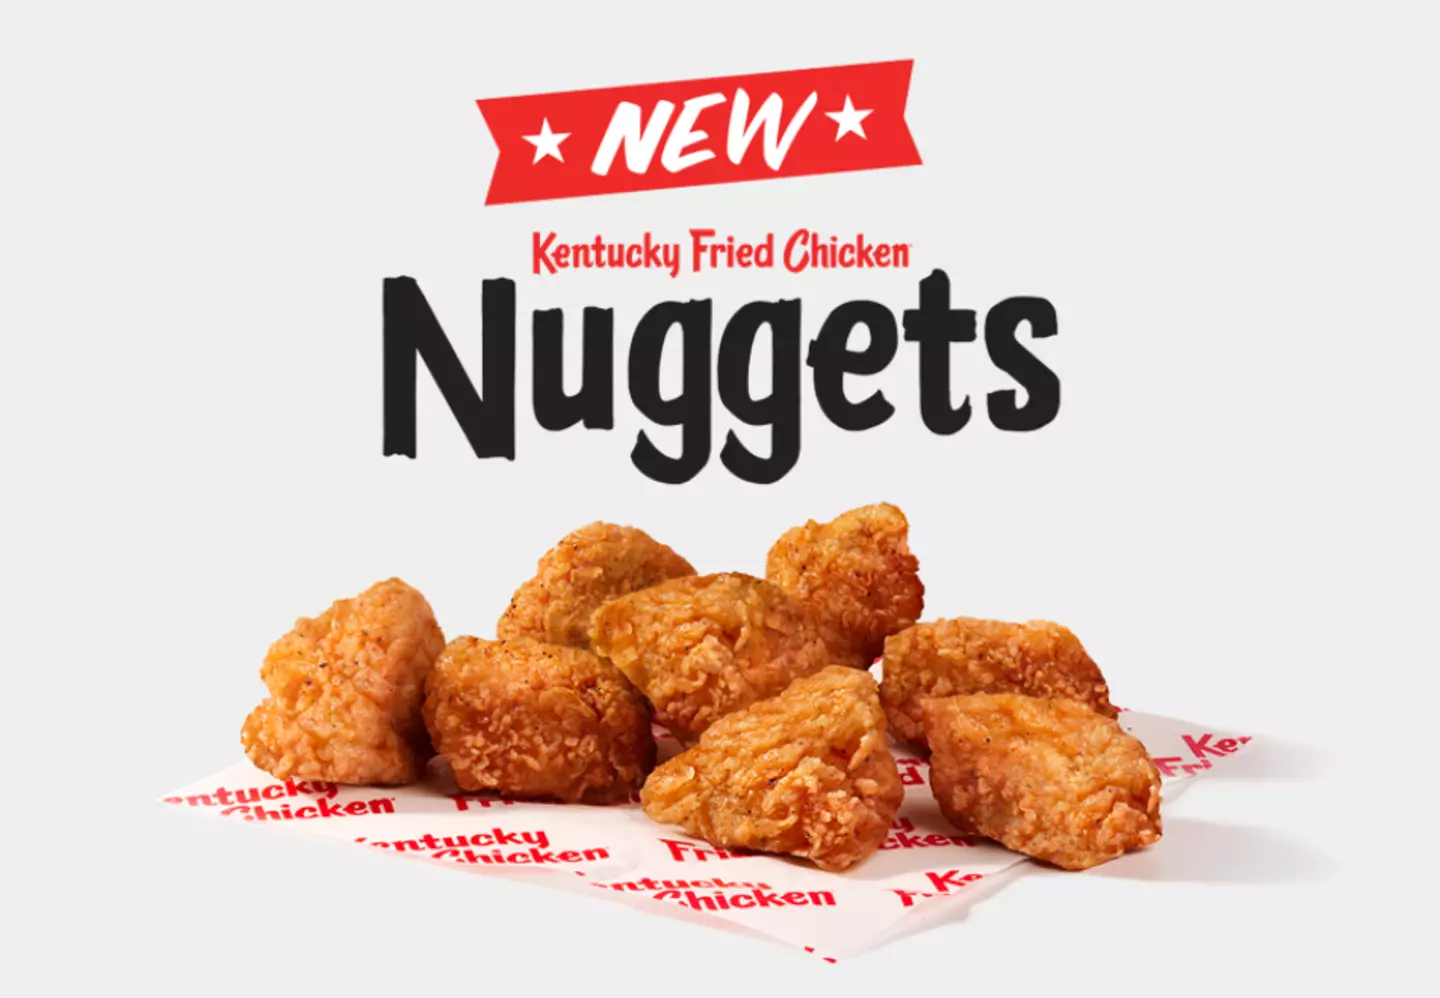 The chicken nuggets use original recipe seasoning of 11 herbs and spices.